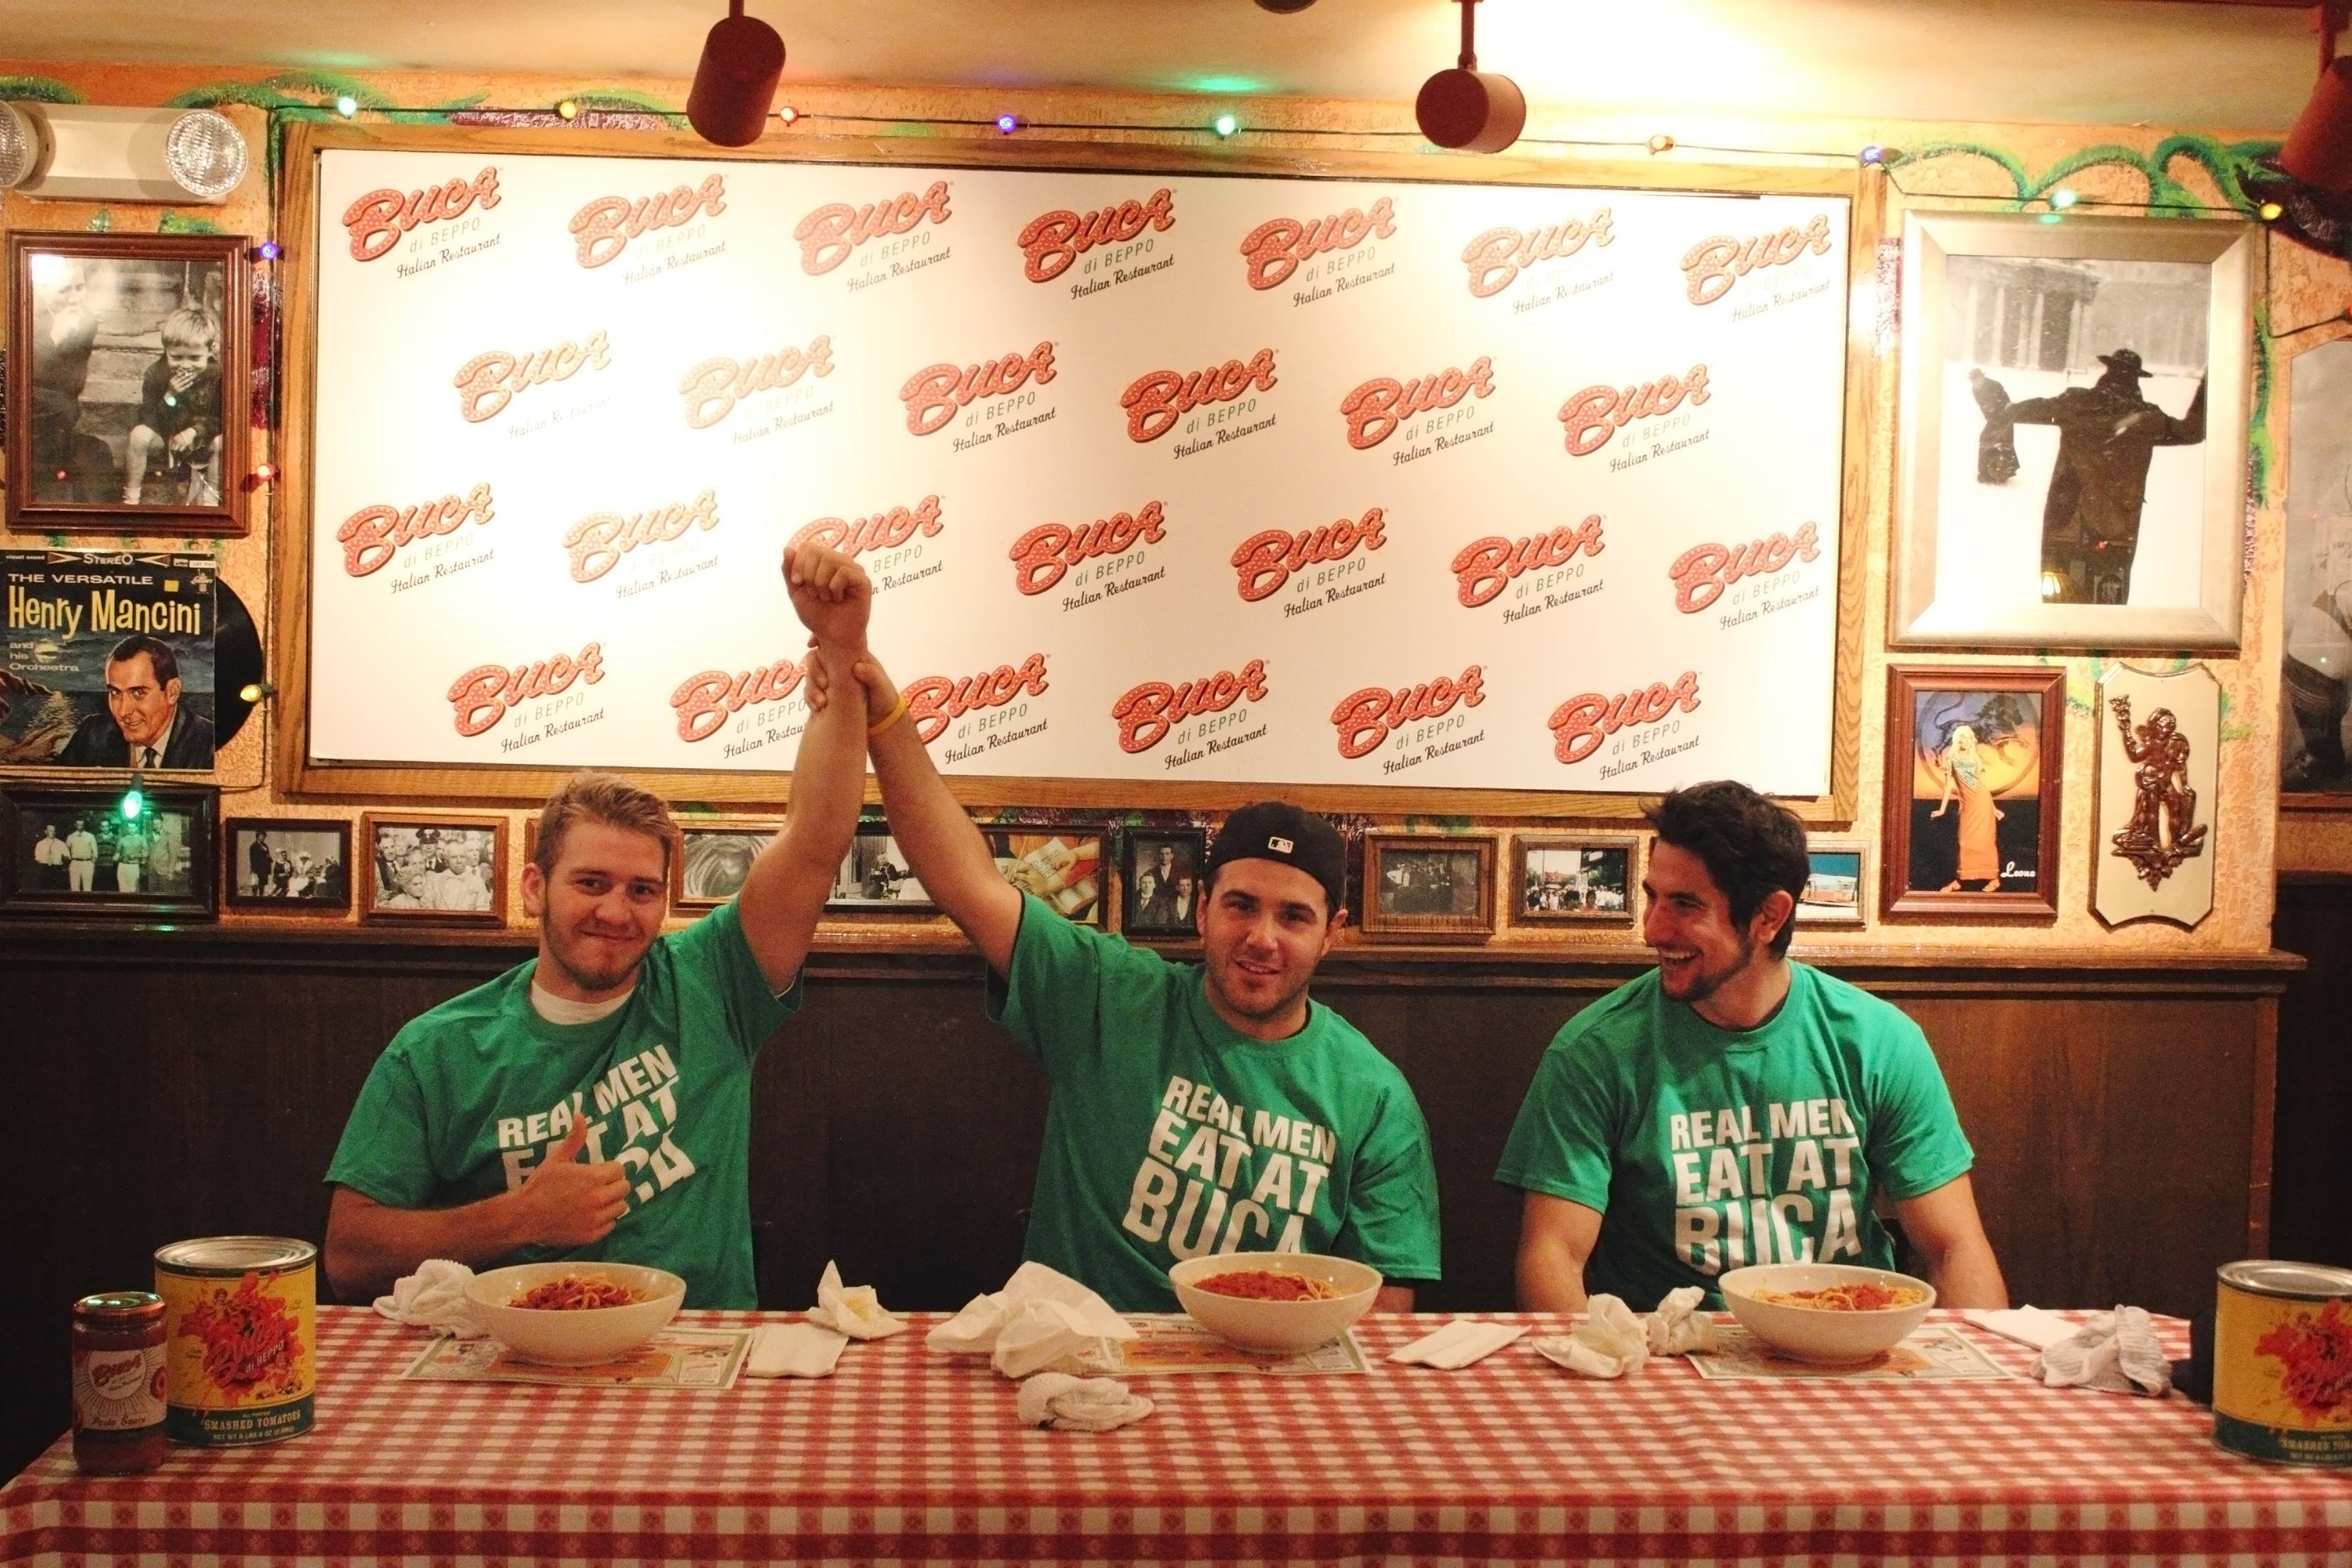 The Las Vegas Wranglers Hockey team celebrate World Pasta Day at Buca di Beppo with a pasta eating contest and meatball slapshots. Photos: Buca di Beppo 